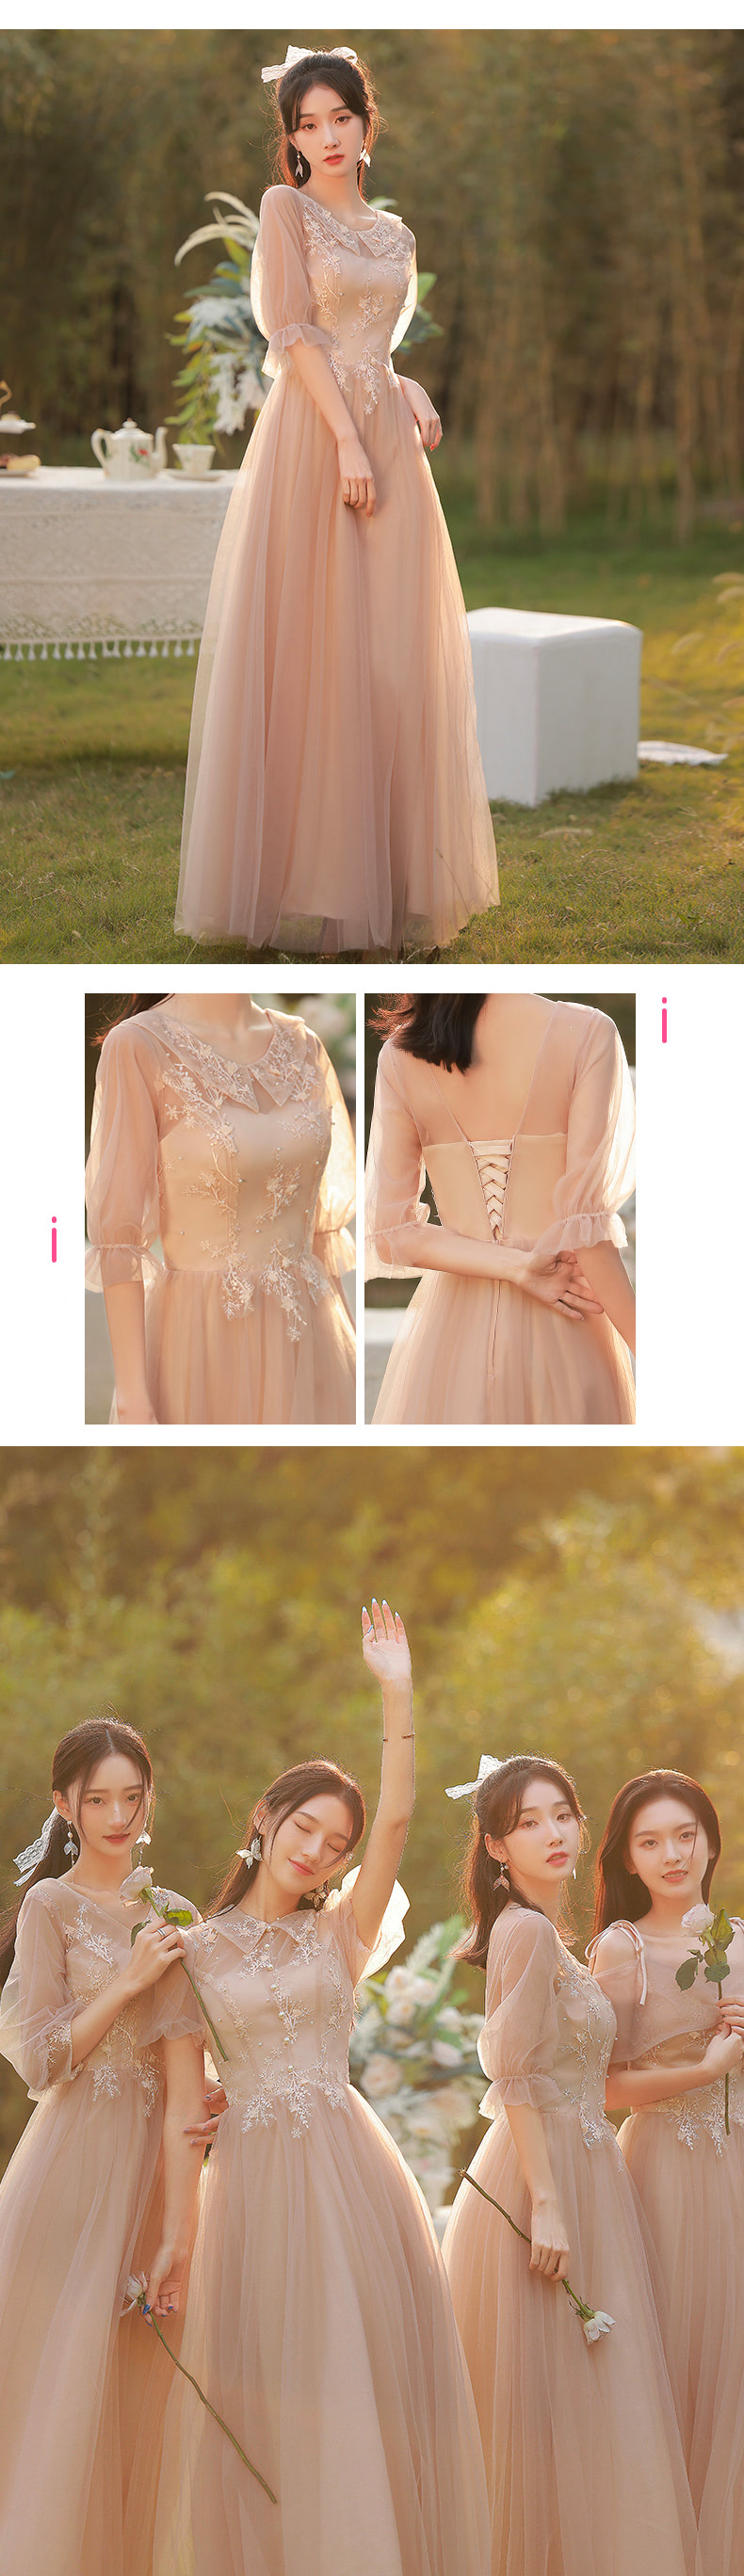 A-Line-Champagne-Wedding-Guest-Bridesmaid-Dress-Casual-Gown17.jpg